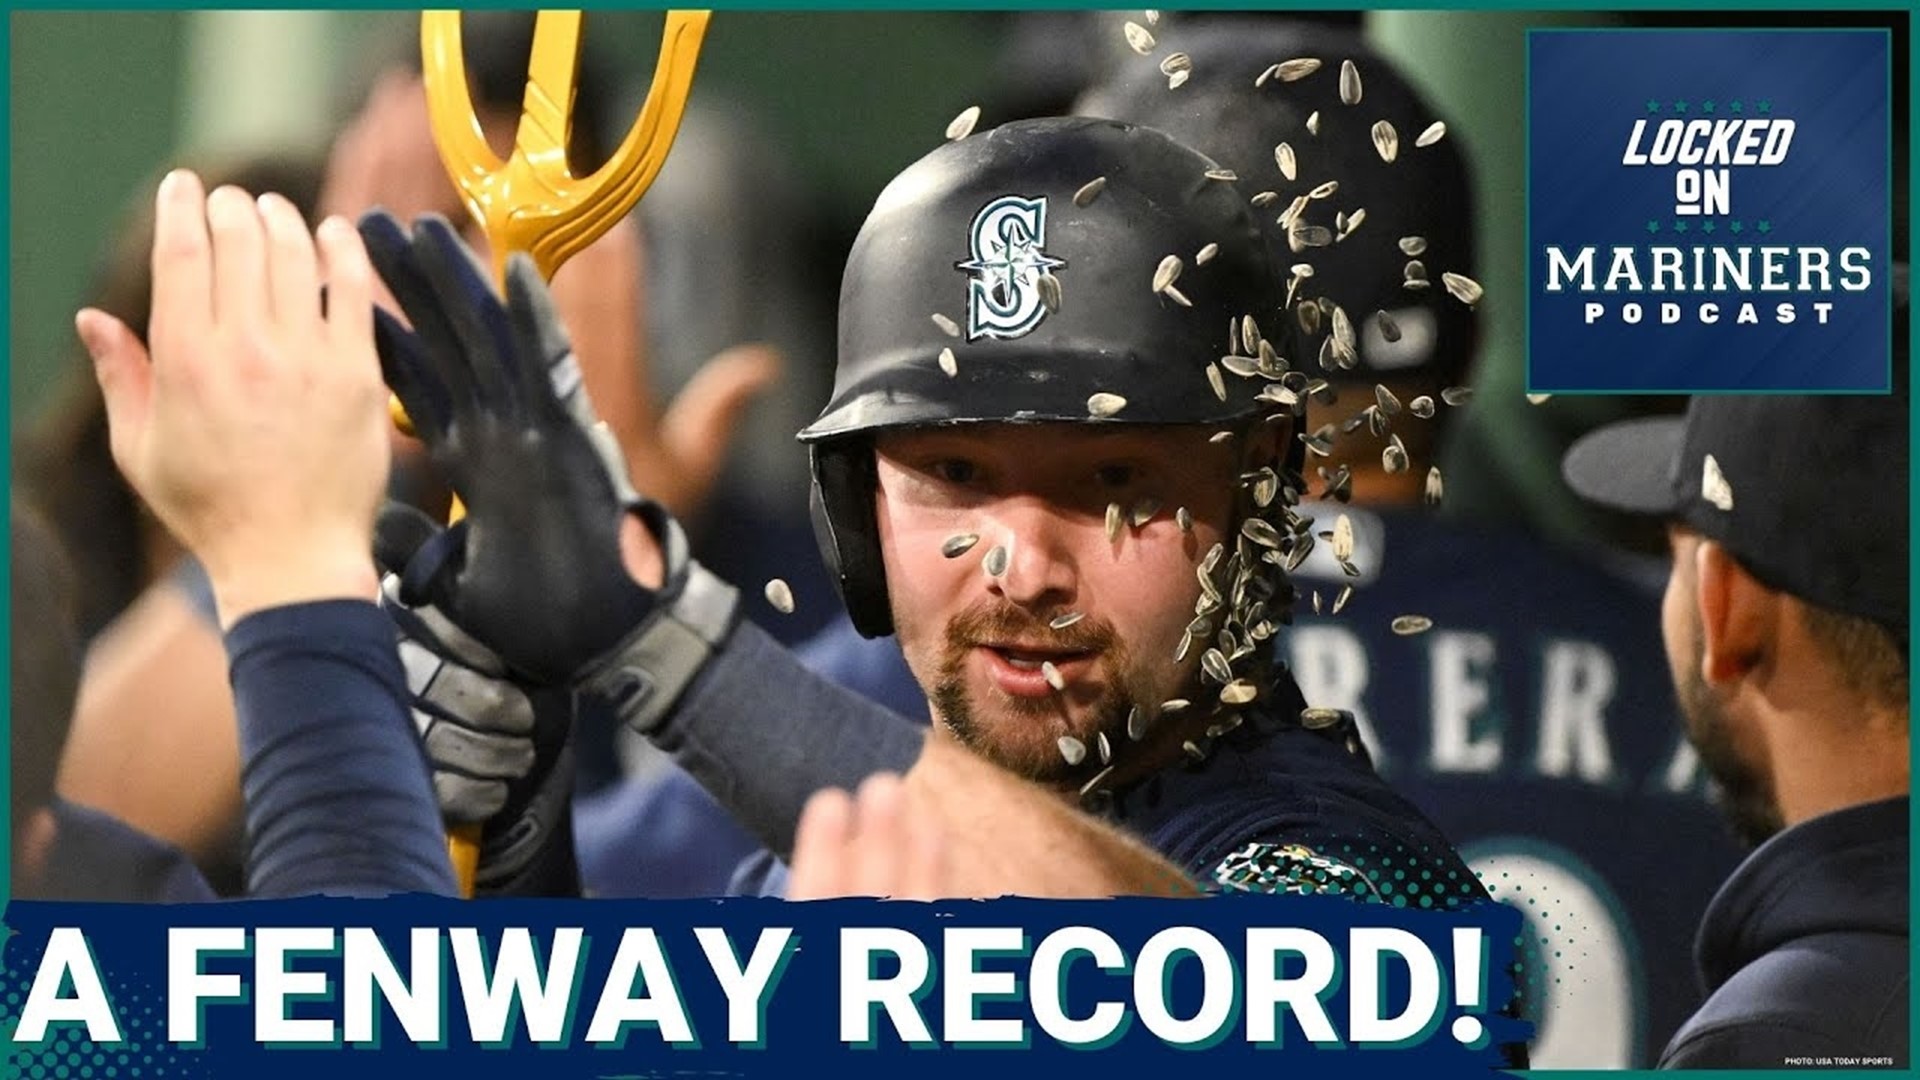 George Kirby spun 6.2 brilliant innings and Cal Raleigh set a Fenway Park record as the Mariners kicked off their three-game series against the Red Sox with a bang.